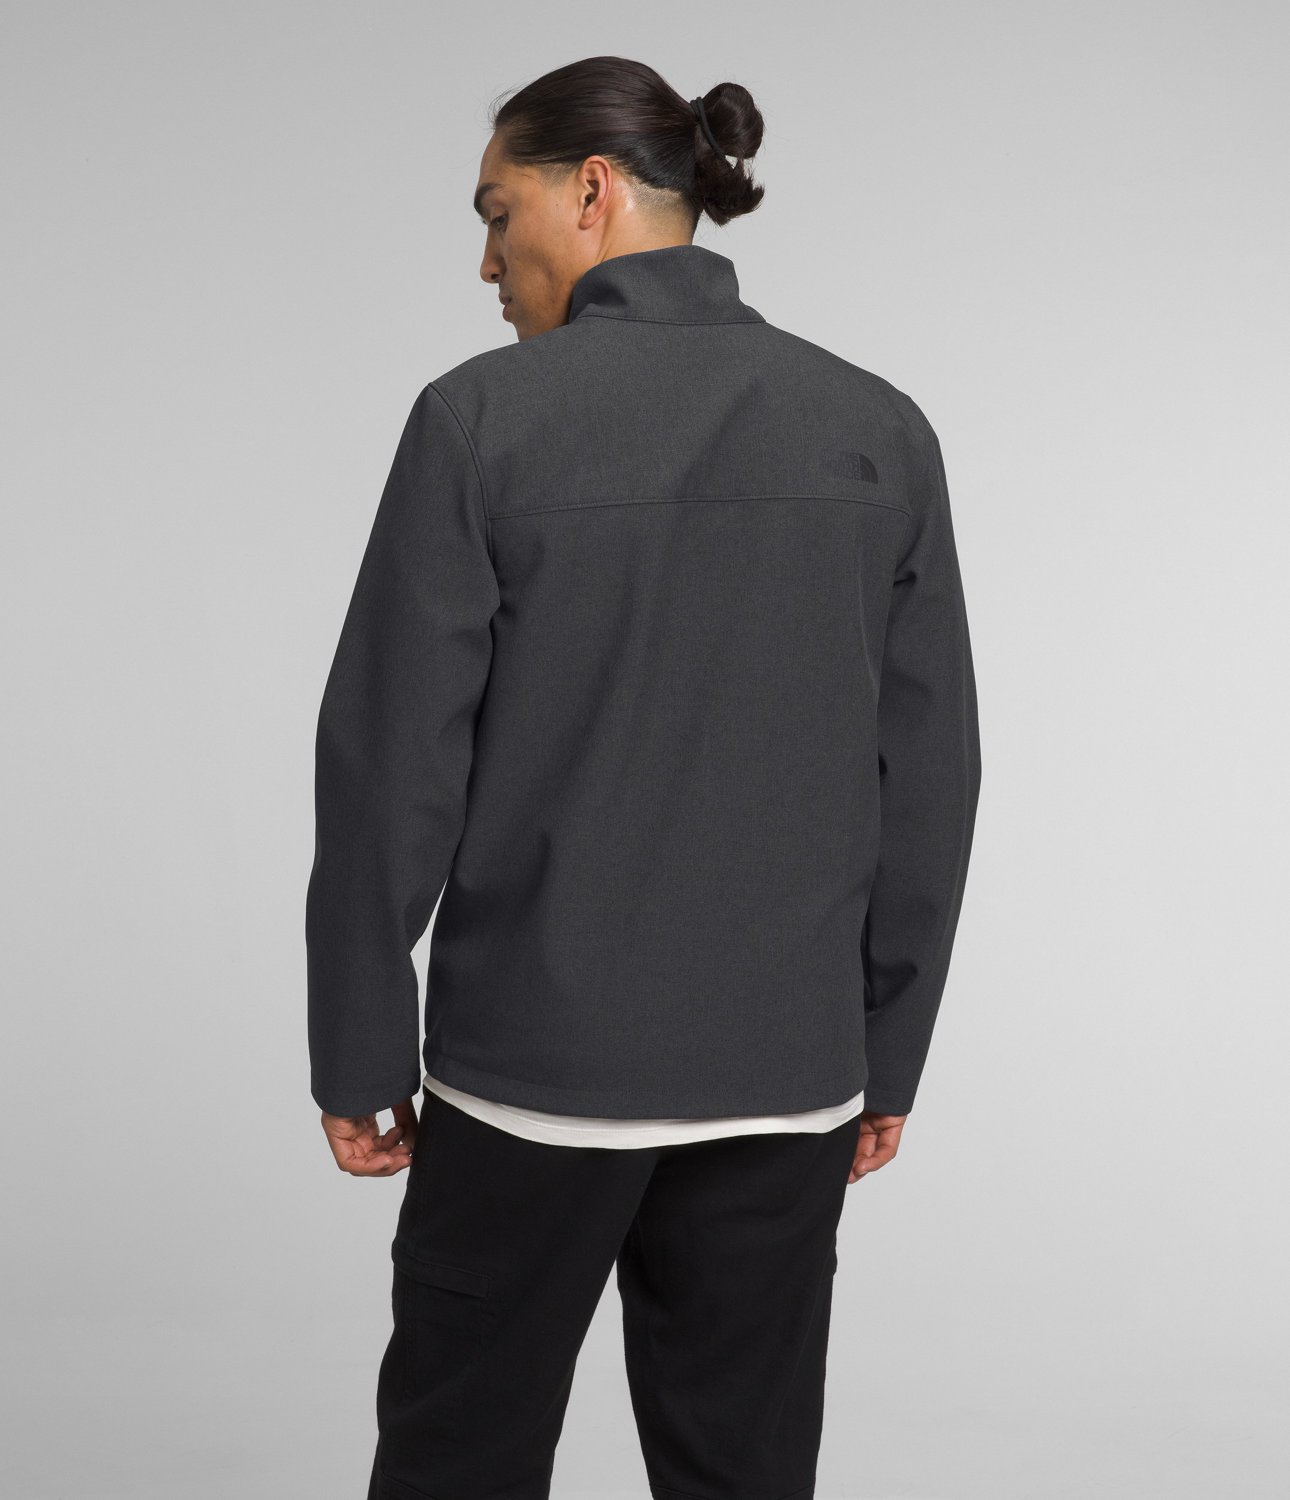 The North Face Men's Apex Bionic 3 Jacket | Academy